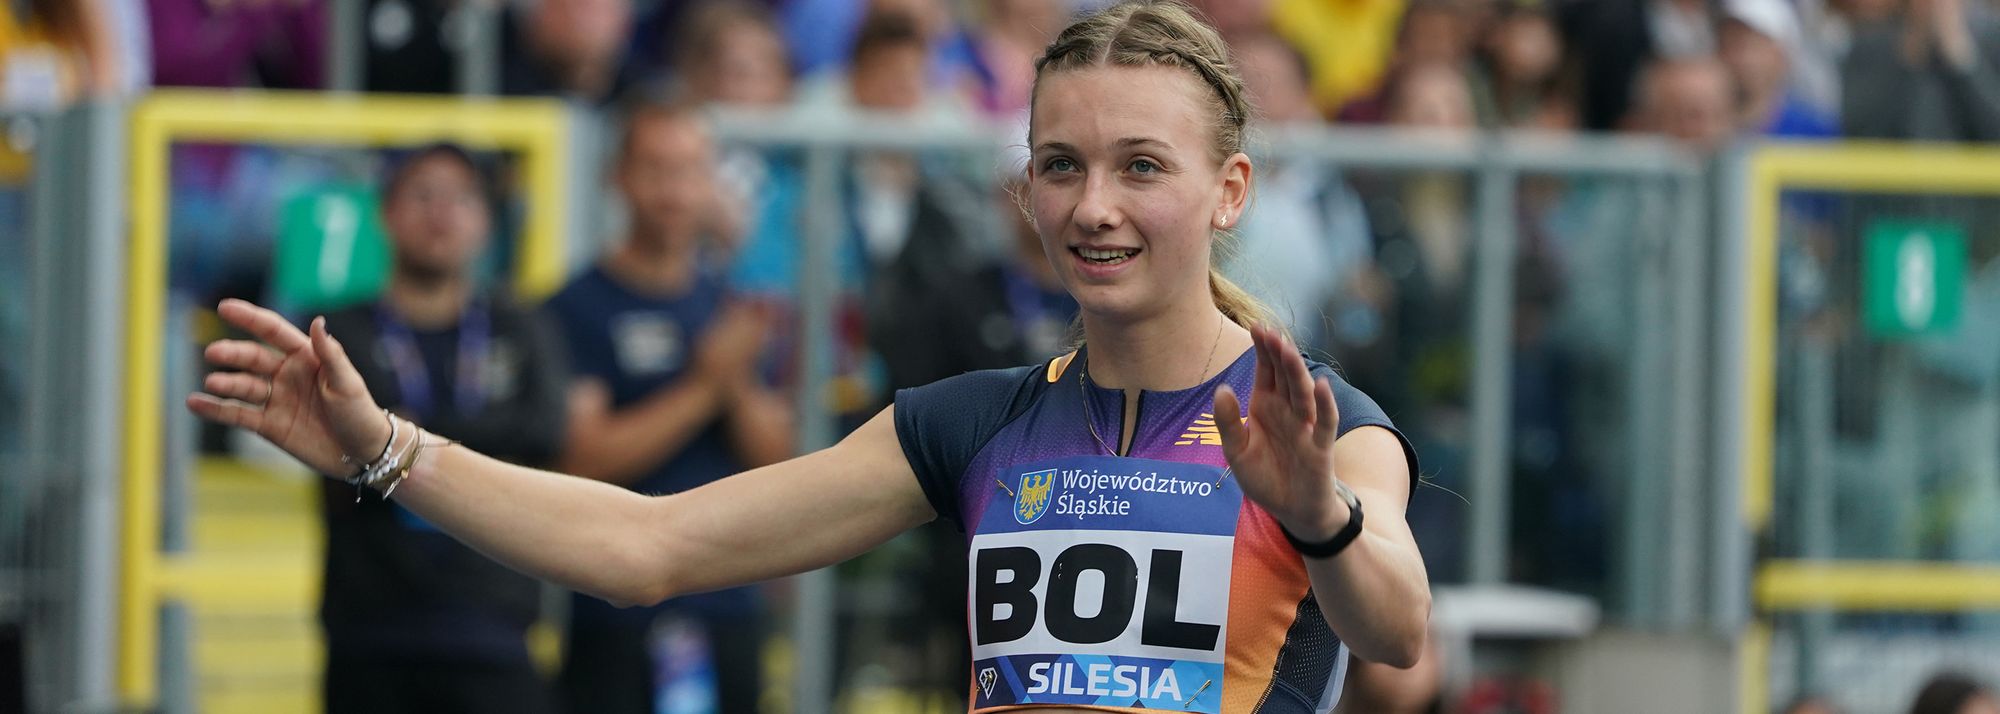 World record-holders Femke Bol and Mondo Duplantis have been announced for Wanda Diamond League meetings in Silesia and Stockholm, respectively